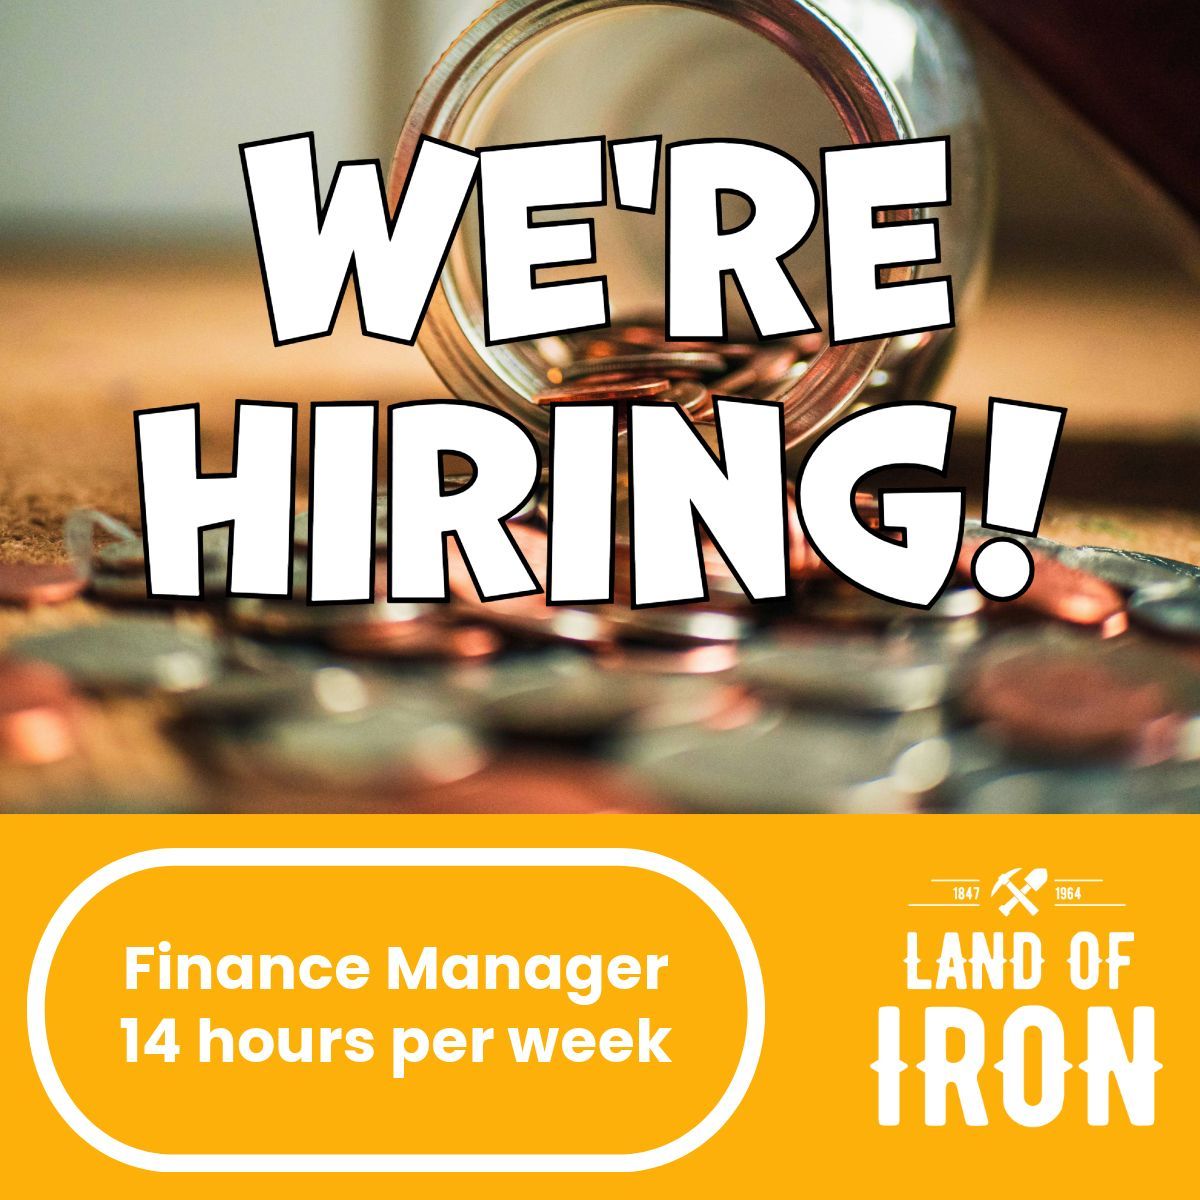 We're looking for a part-time Financial Manager to join us at Land of Iron. Do you think this could be for you? Deadline for applications is Fri 26 April. Full details on our website: buff.ly/3w10tuX